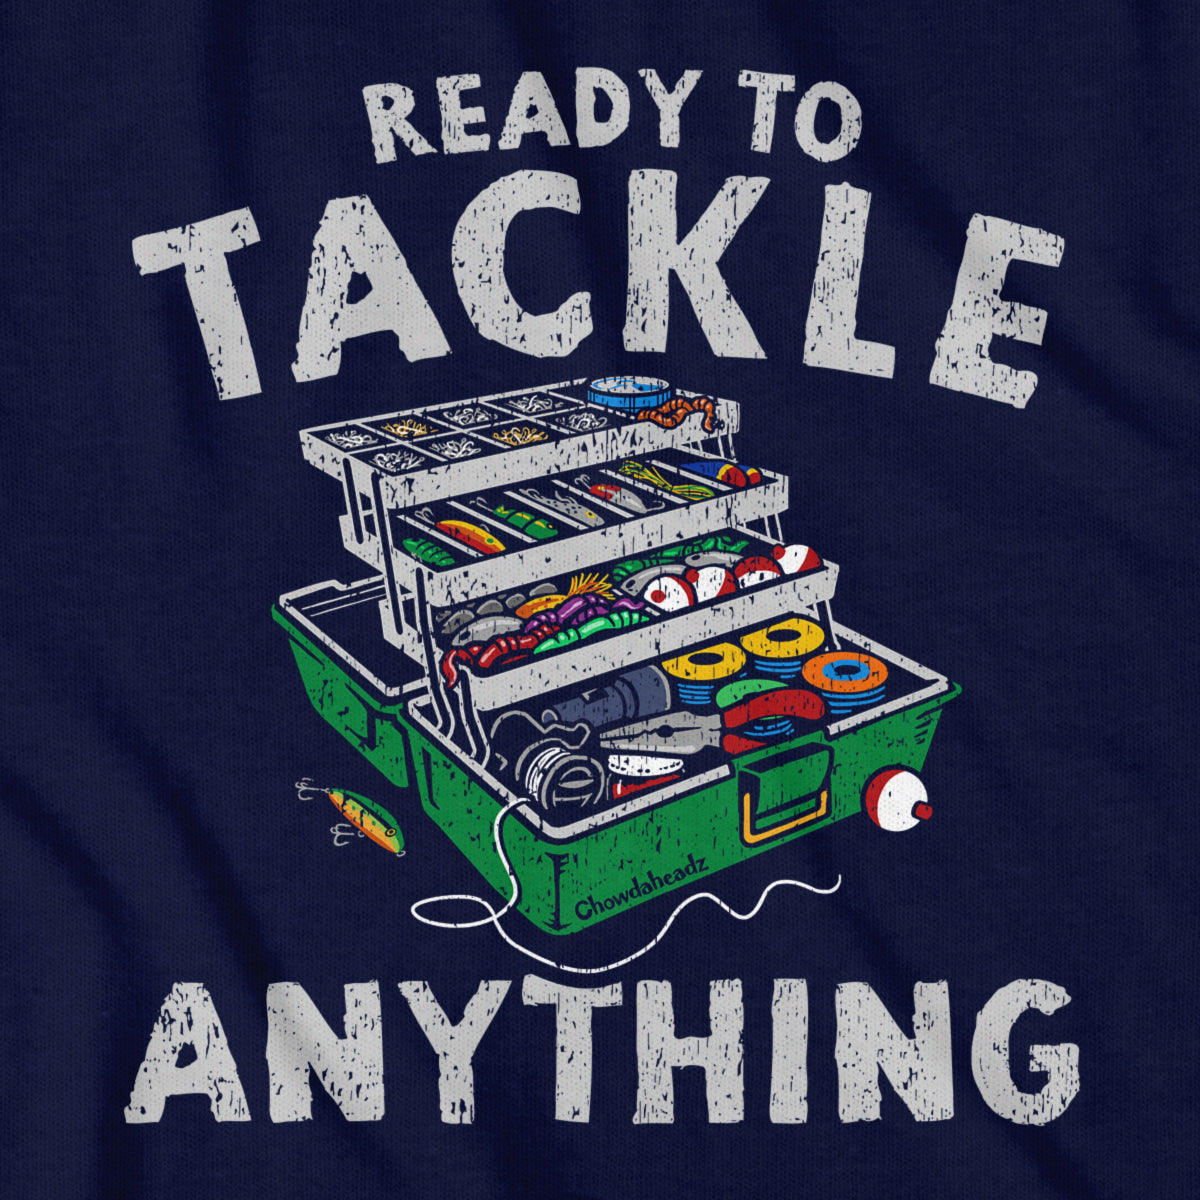 Ready To Tackle Anything T-Shirt - Chowdaheadz